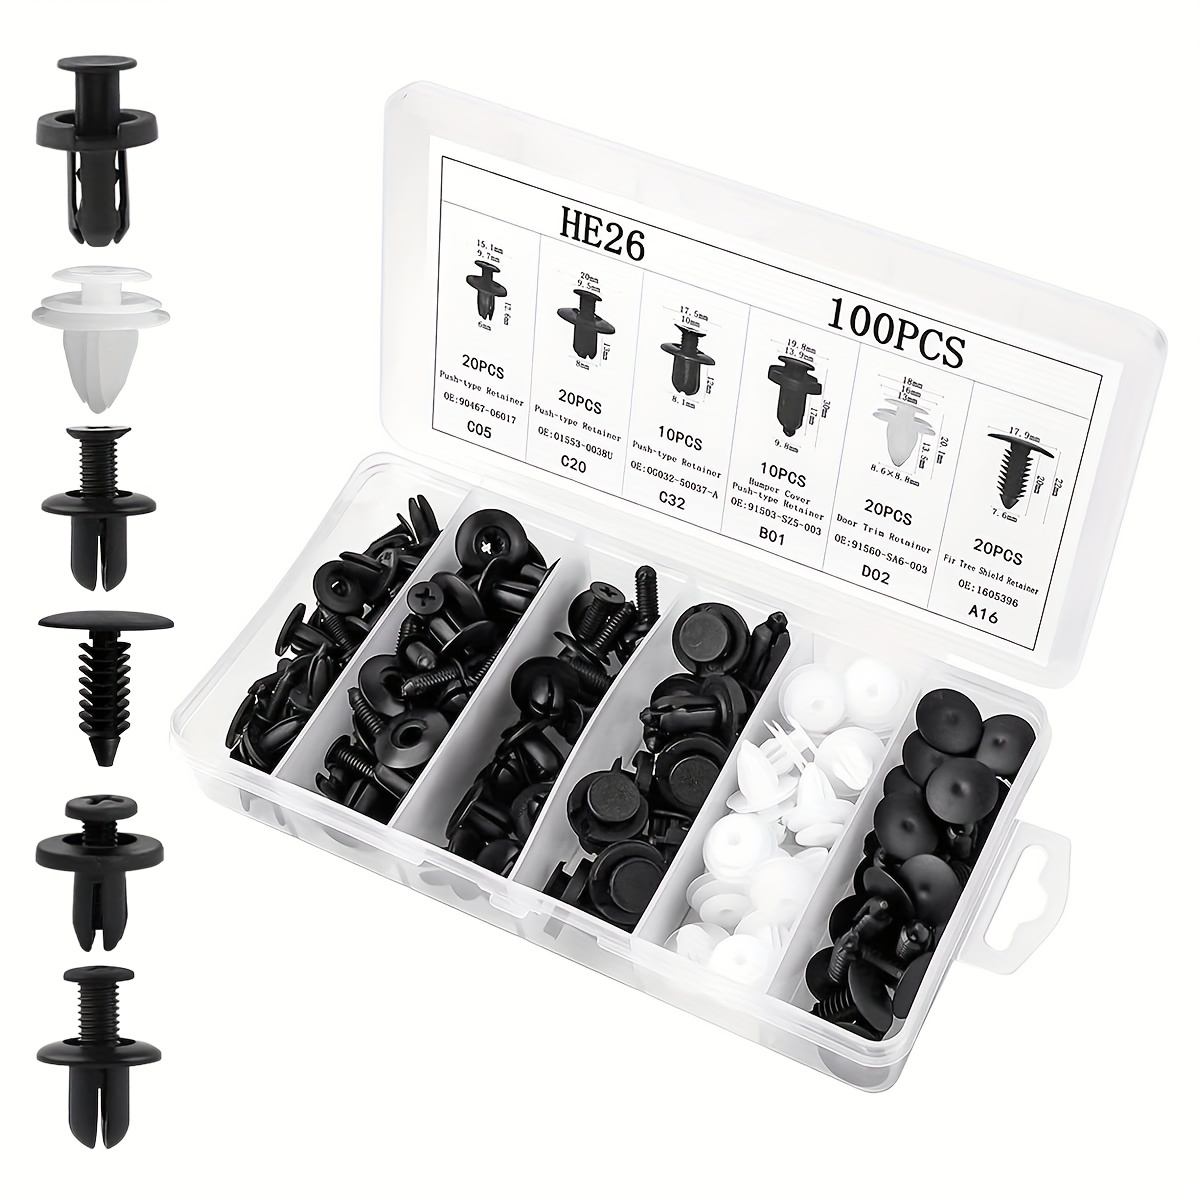 620 Pcs Car Retainer Clips Plastic Fasteners Kit Fender Rivet Clips 16 Most  Popular Sizes Auto Push Pin Rivets Set For Toyota Gm Ford Honda Acura Chry